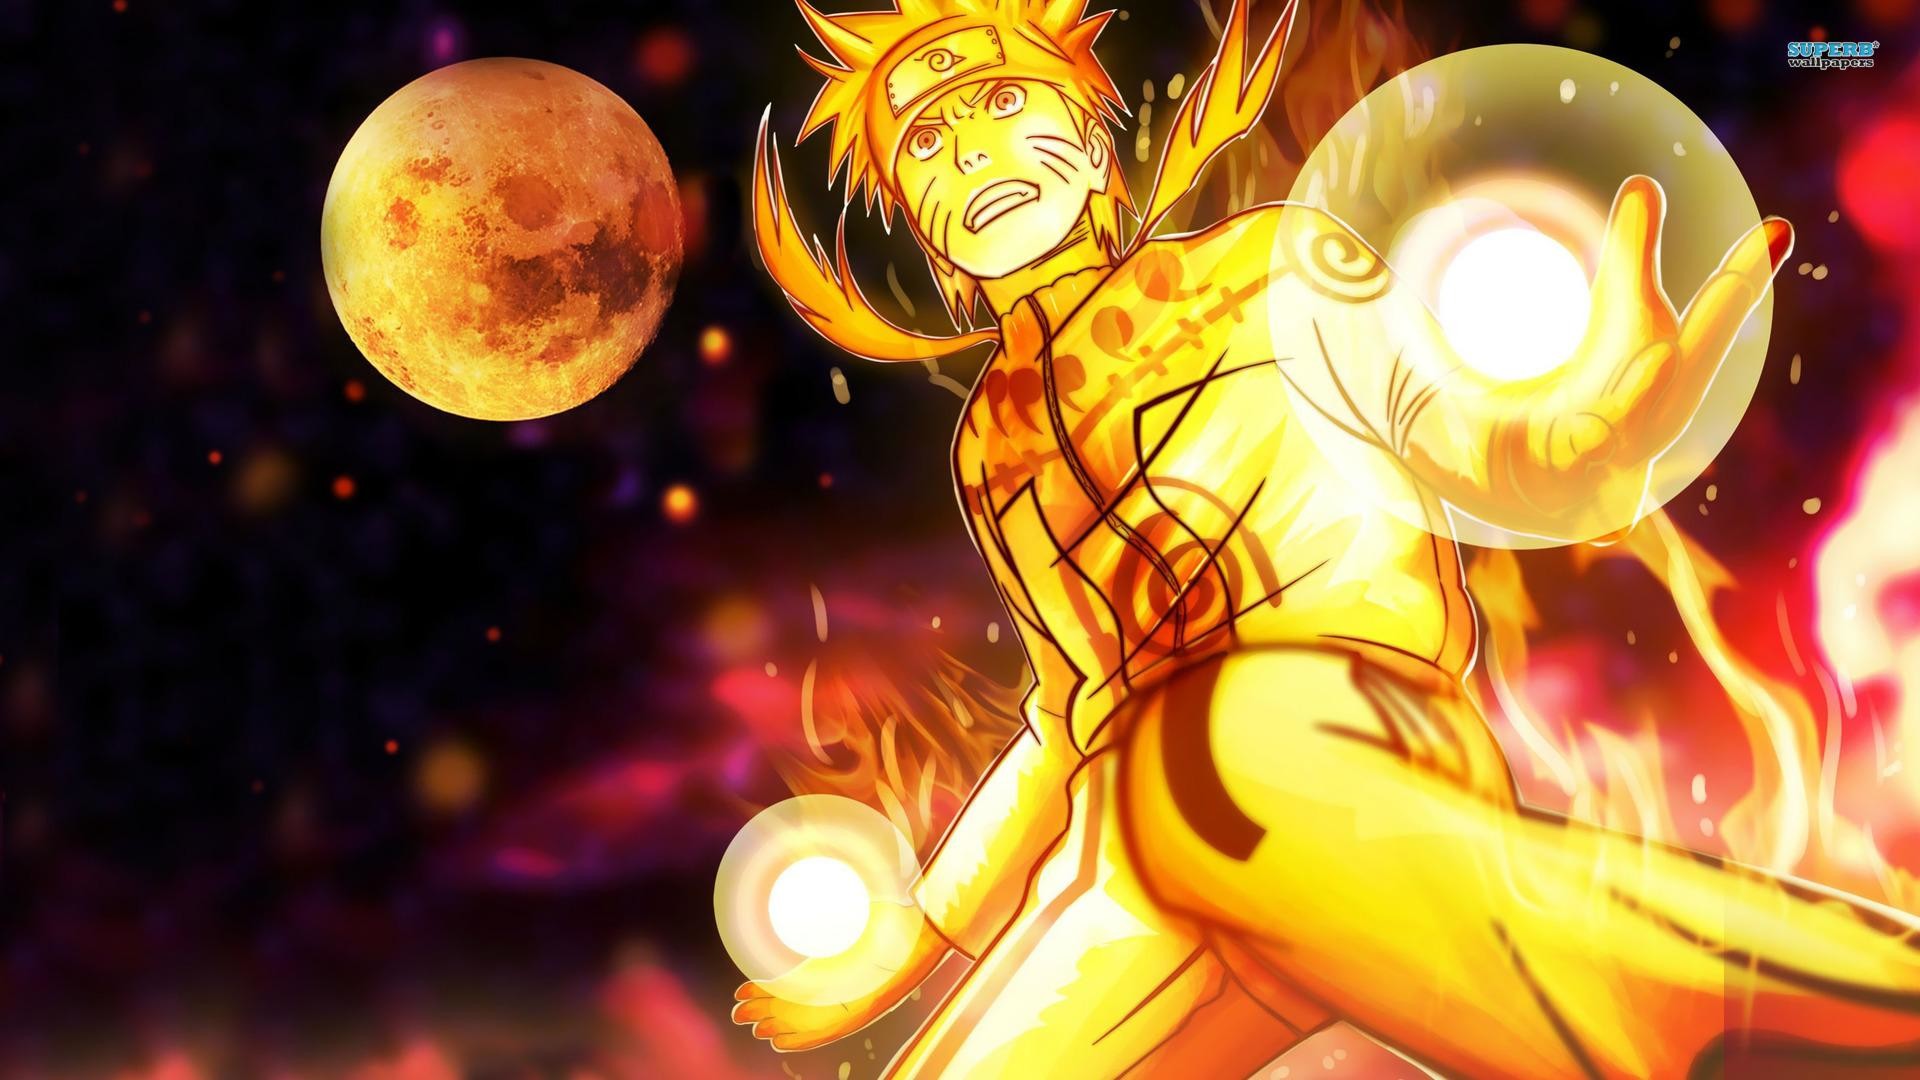 1920x1080 ... Hd Collection Naruto Cool Wallpapers - Wallpaper Gallery ...